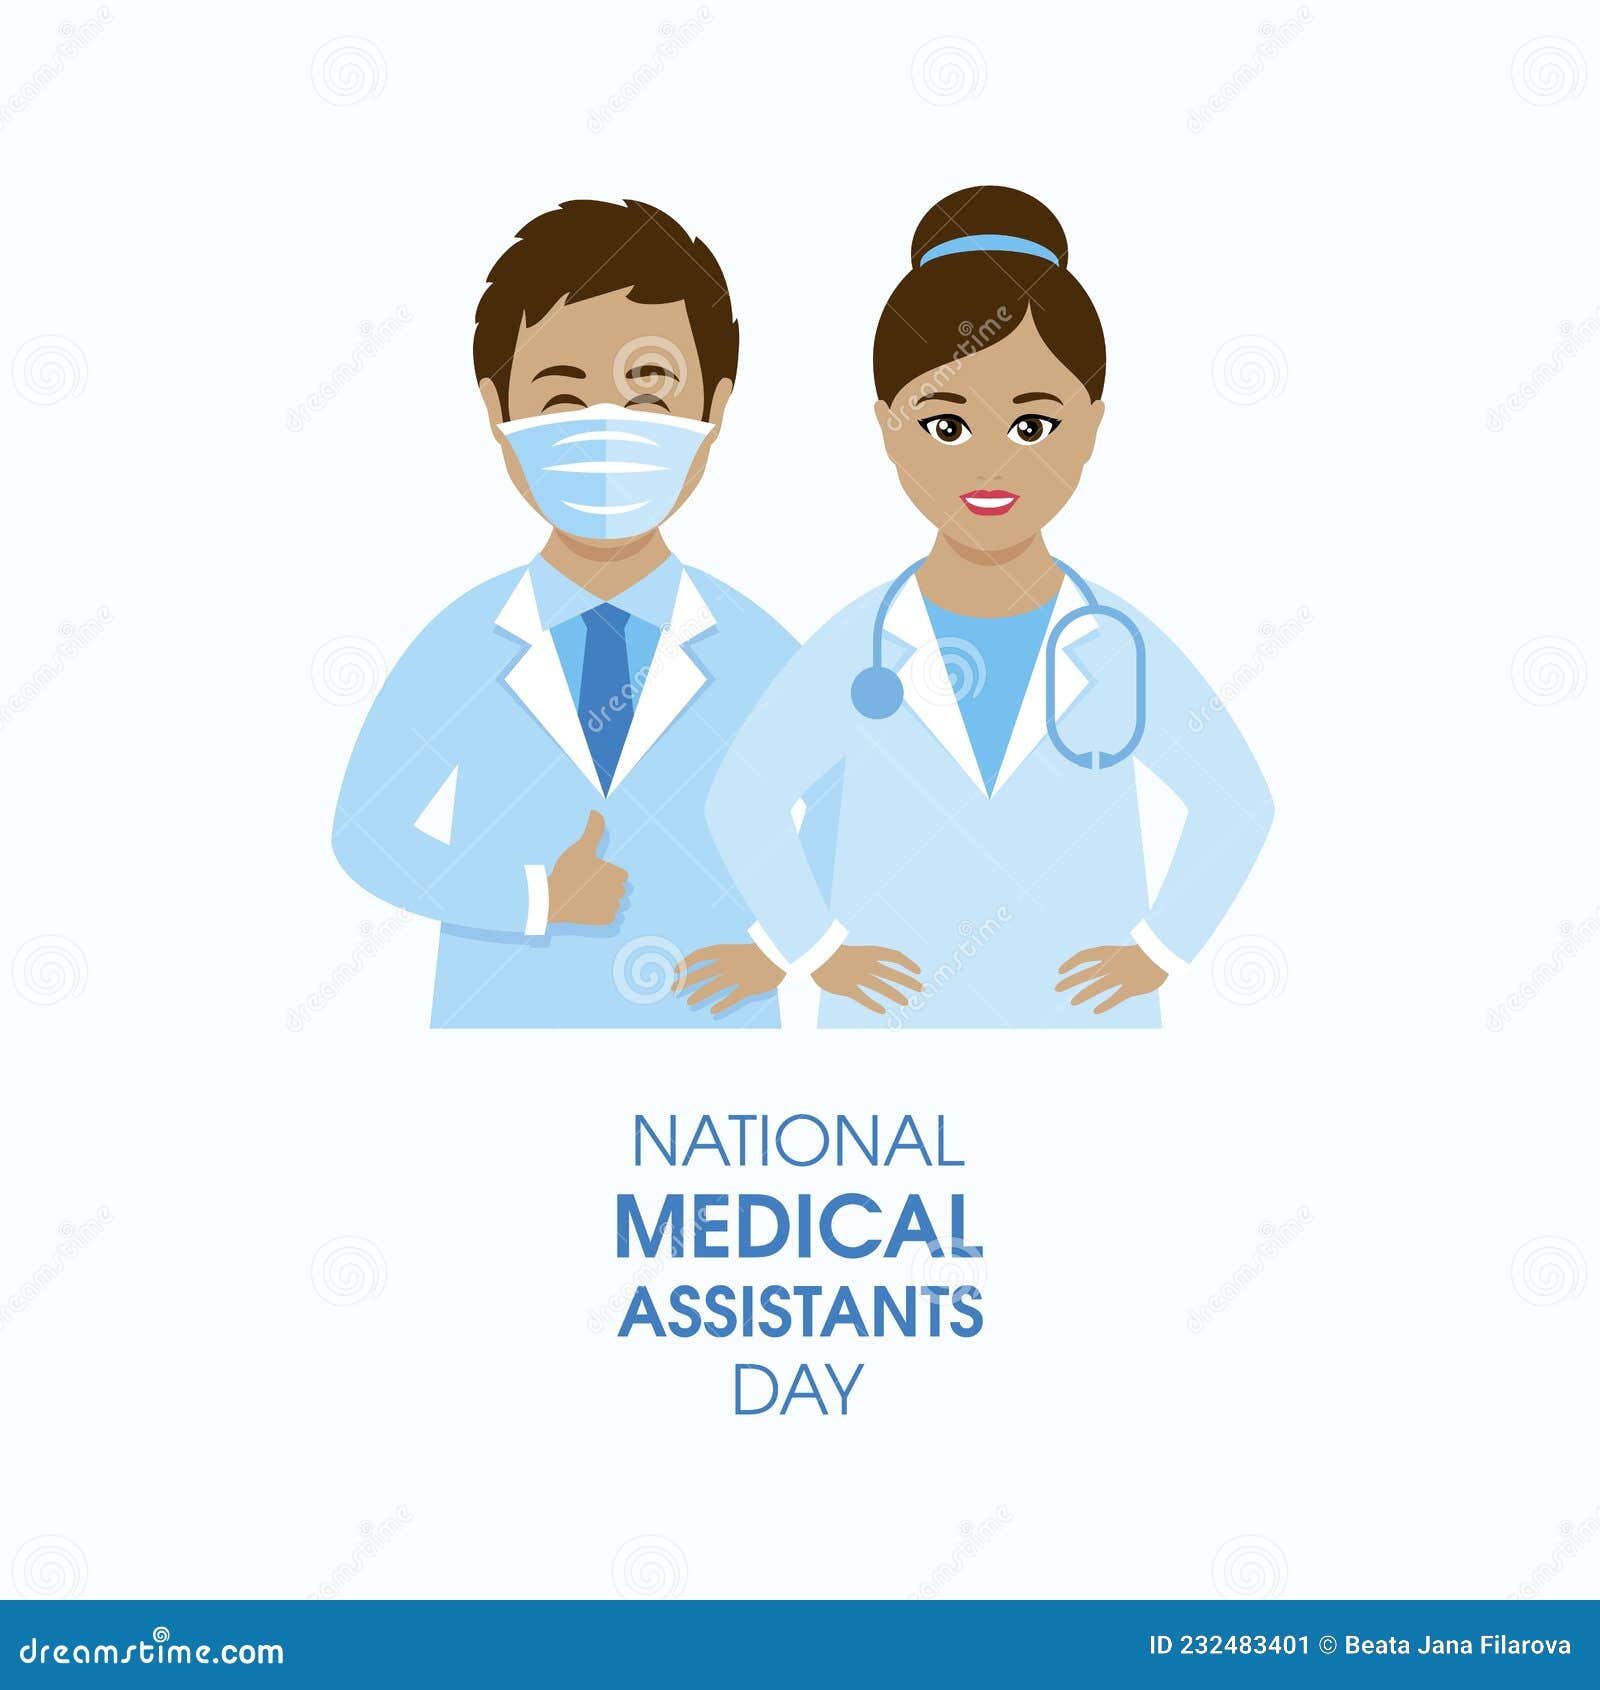 National Medical Assistants Day Vector Stock Vector Illustration of